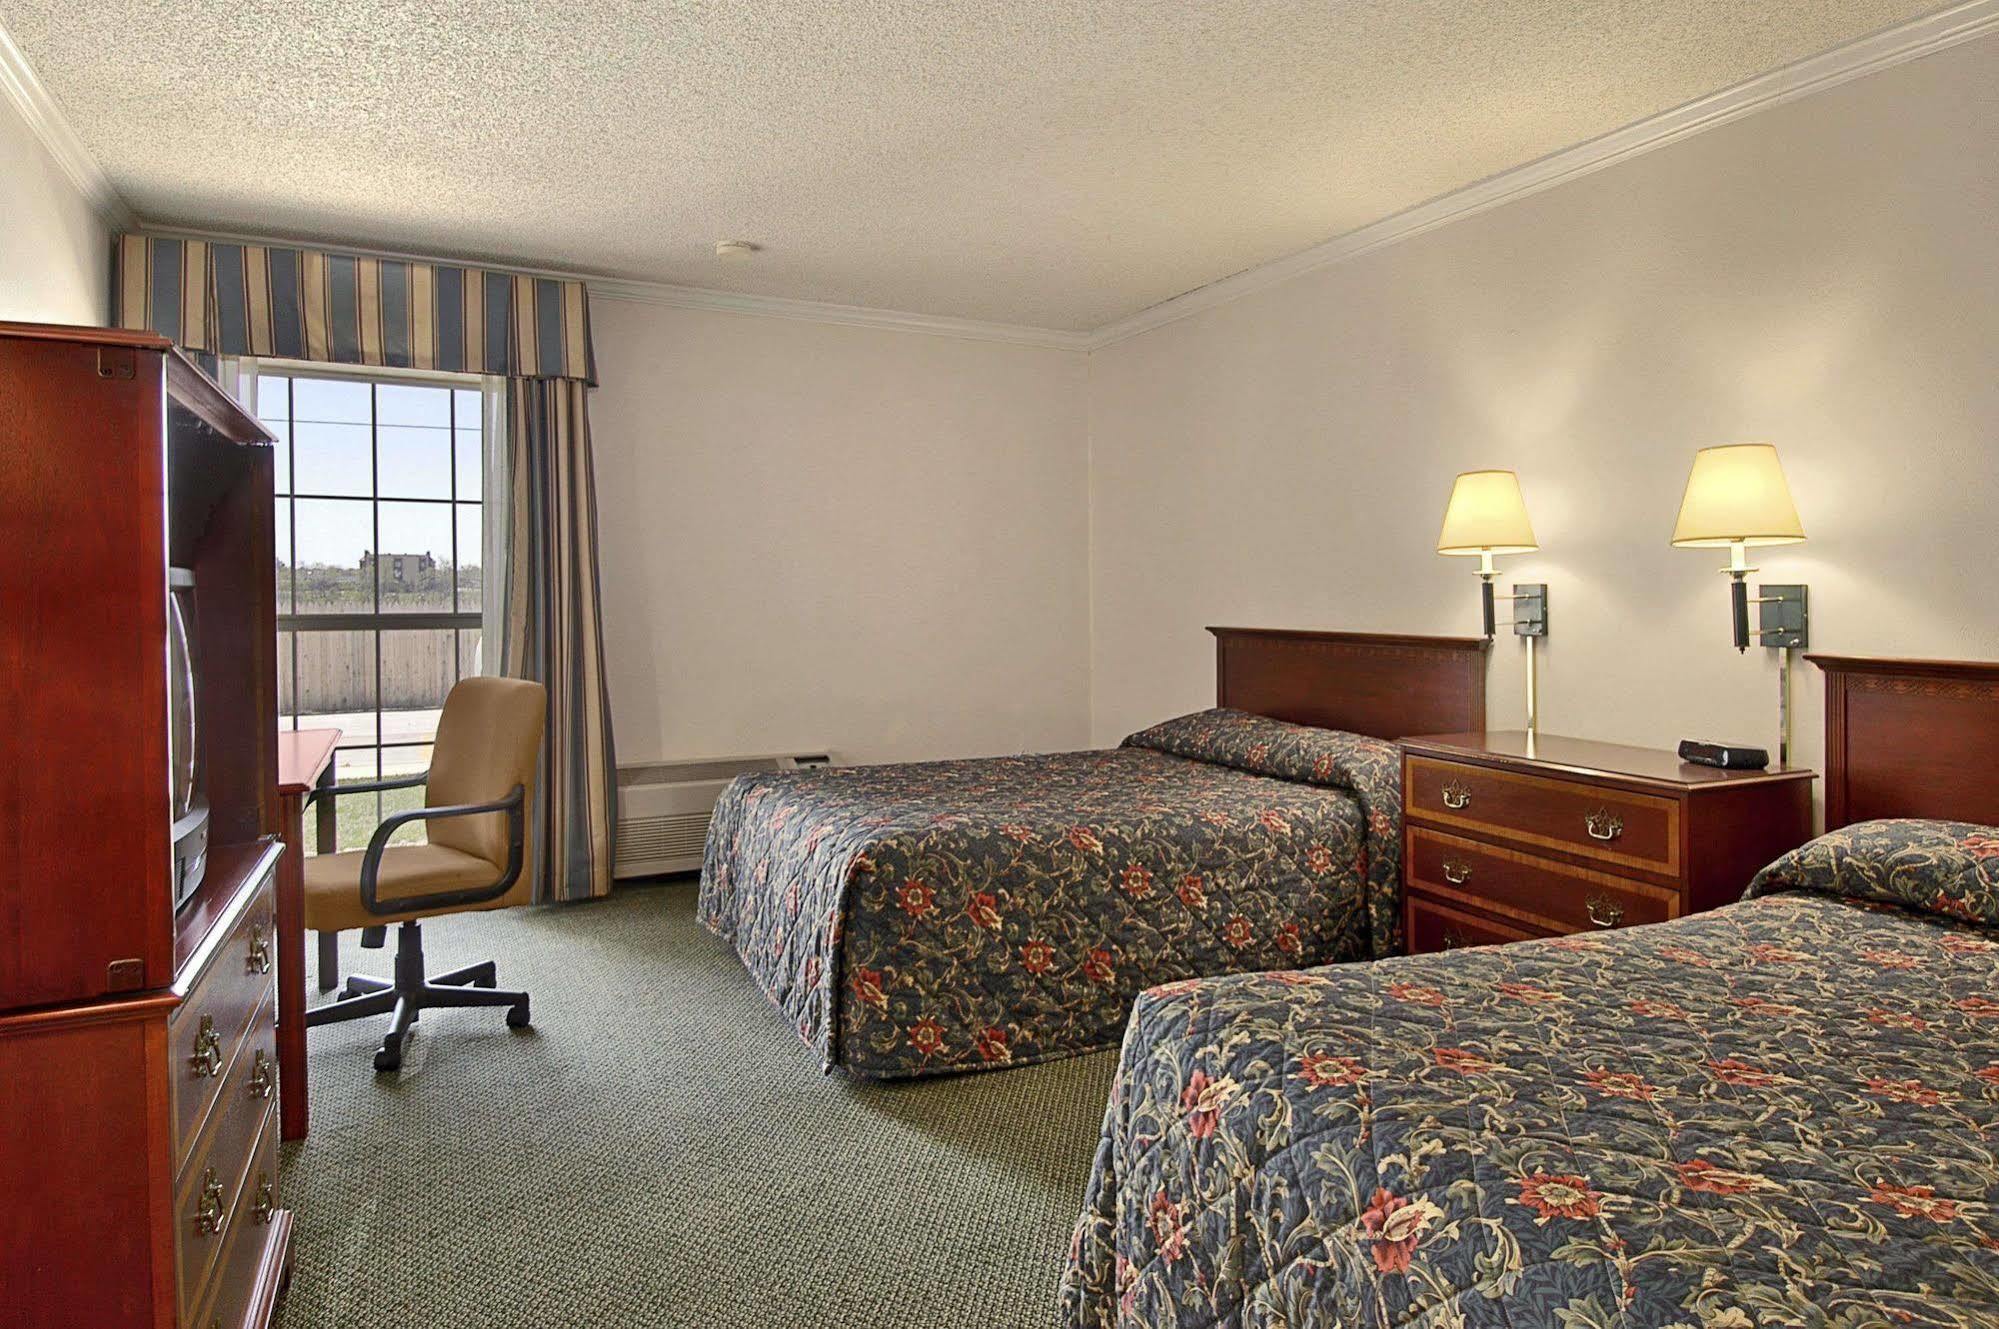 Extend-A-Suites - Extended Stay, I-40 Amarillo West Kamer foto